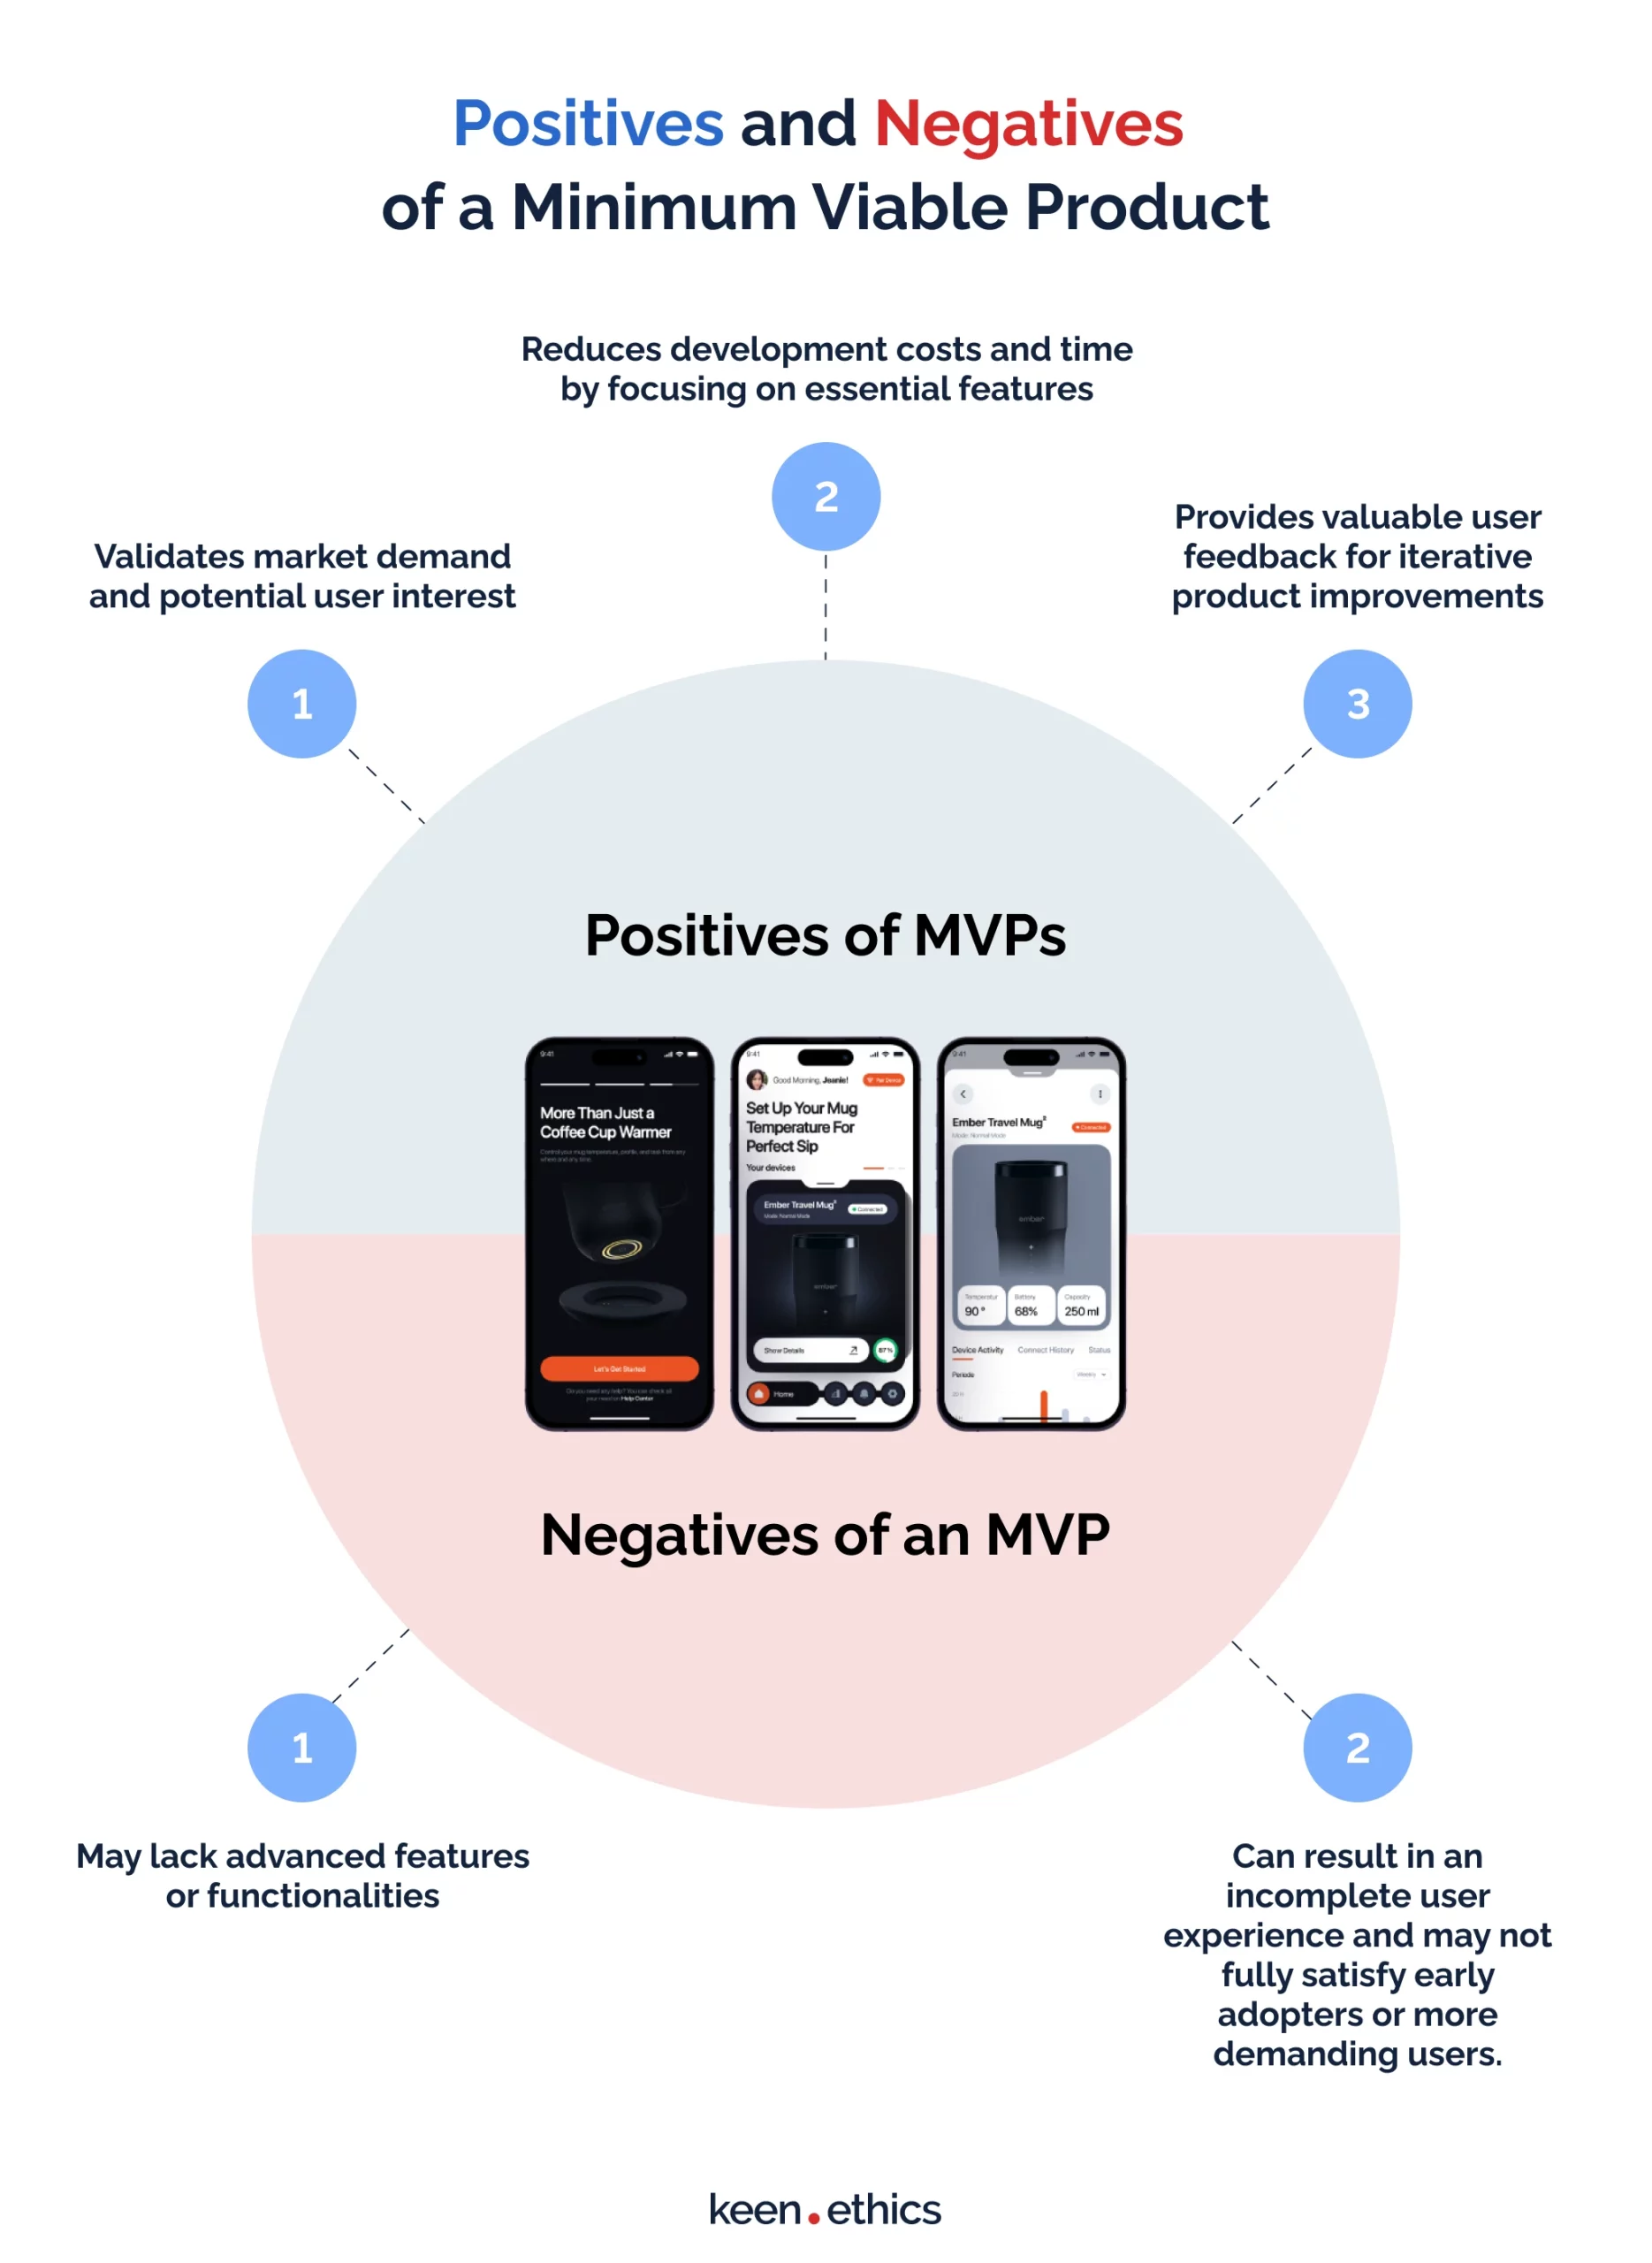 Positives and negatives of an MVP